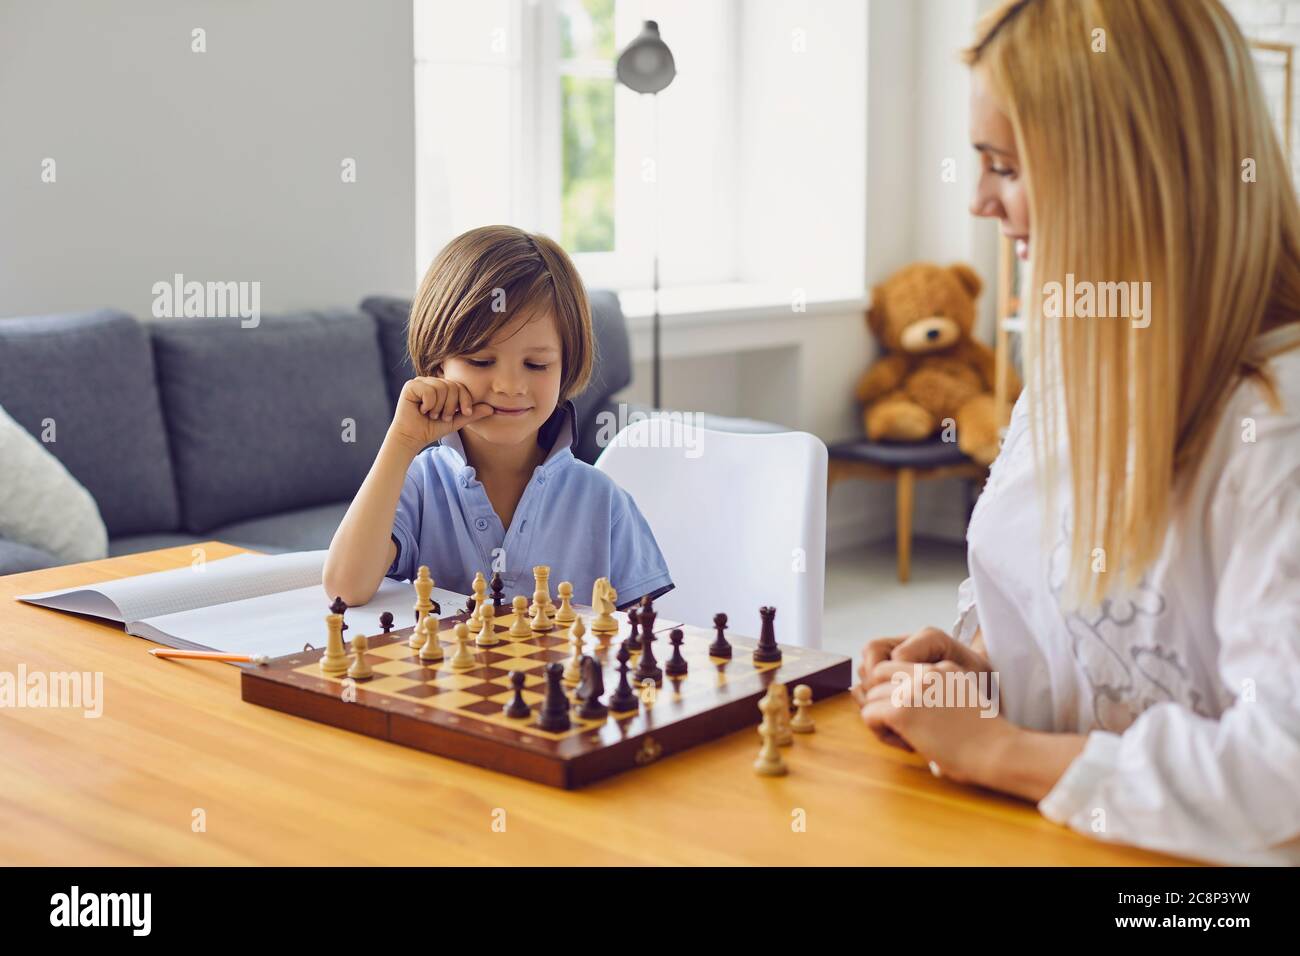 Family hobbies. Young mother playing chess with son at home. Little boy engaged in board game with his parent in room Stock Photo